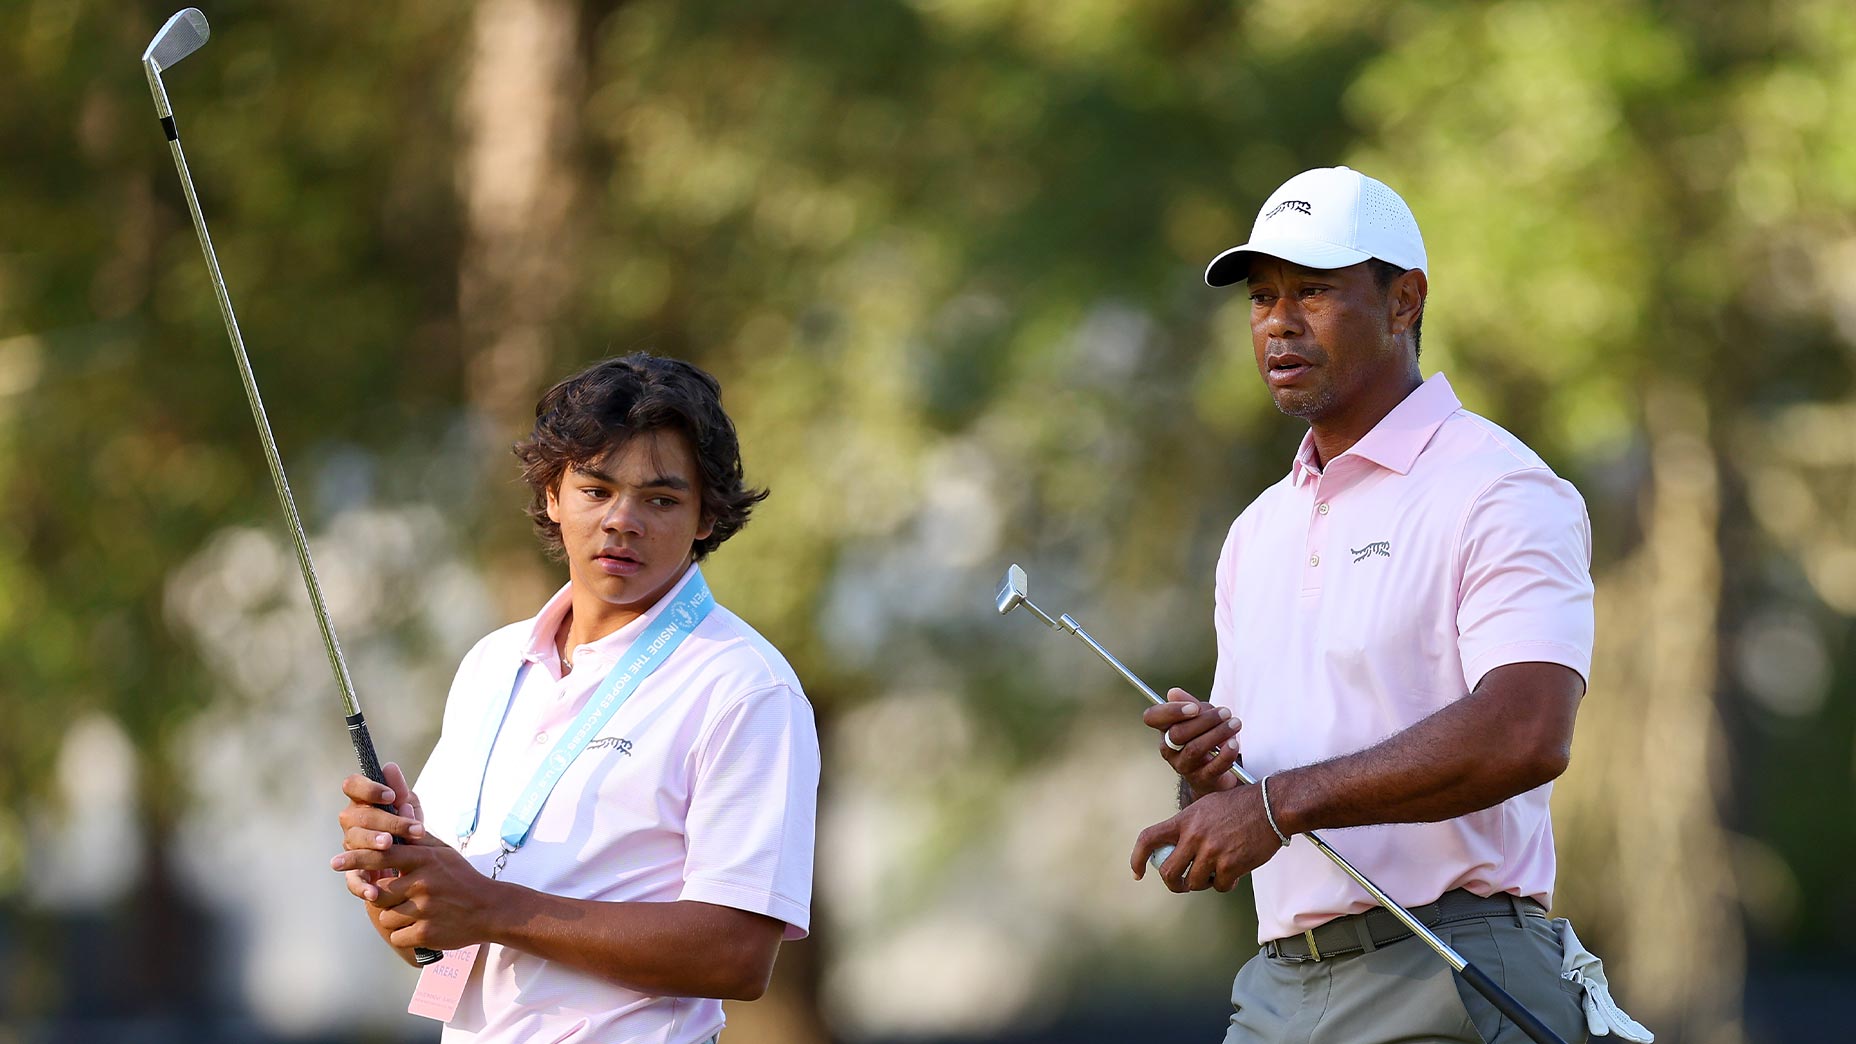 charlie woods and tiger woods stand next to each other in pink shirts